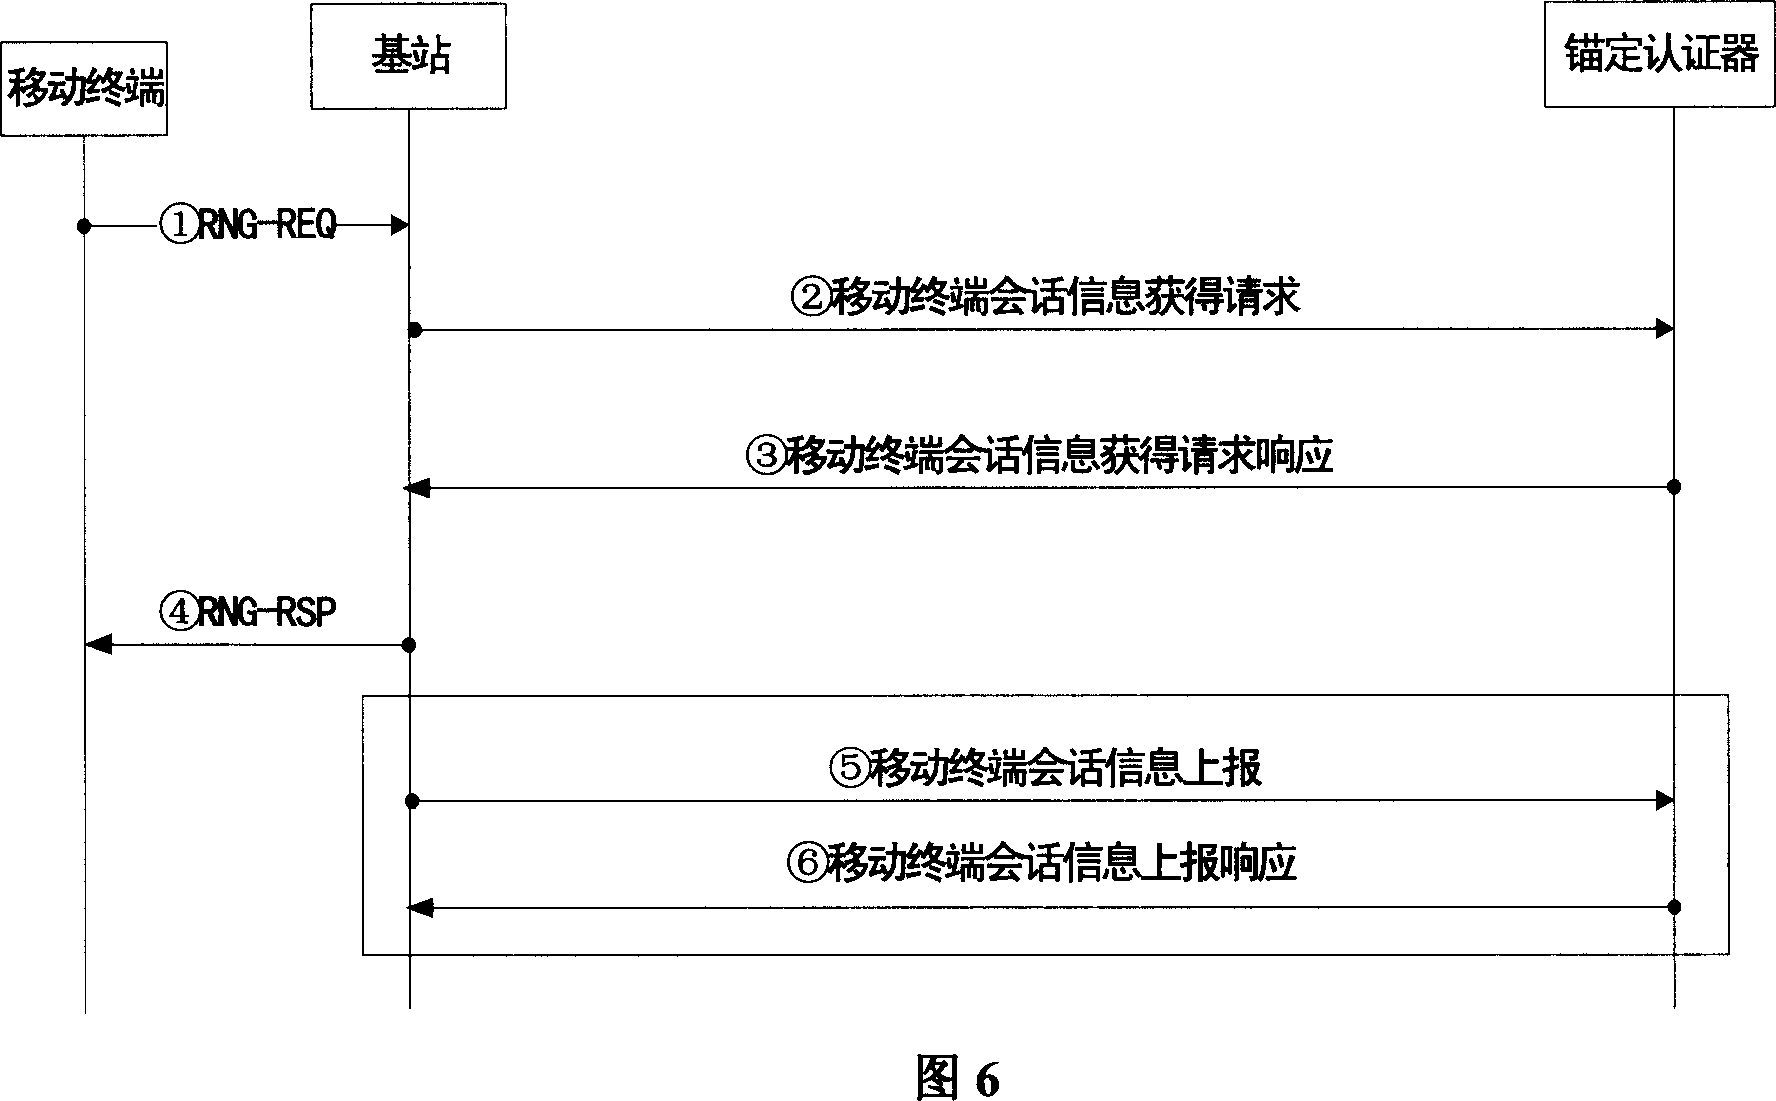 AK context cache method for wireless communication system